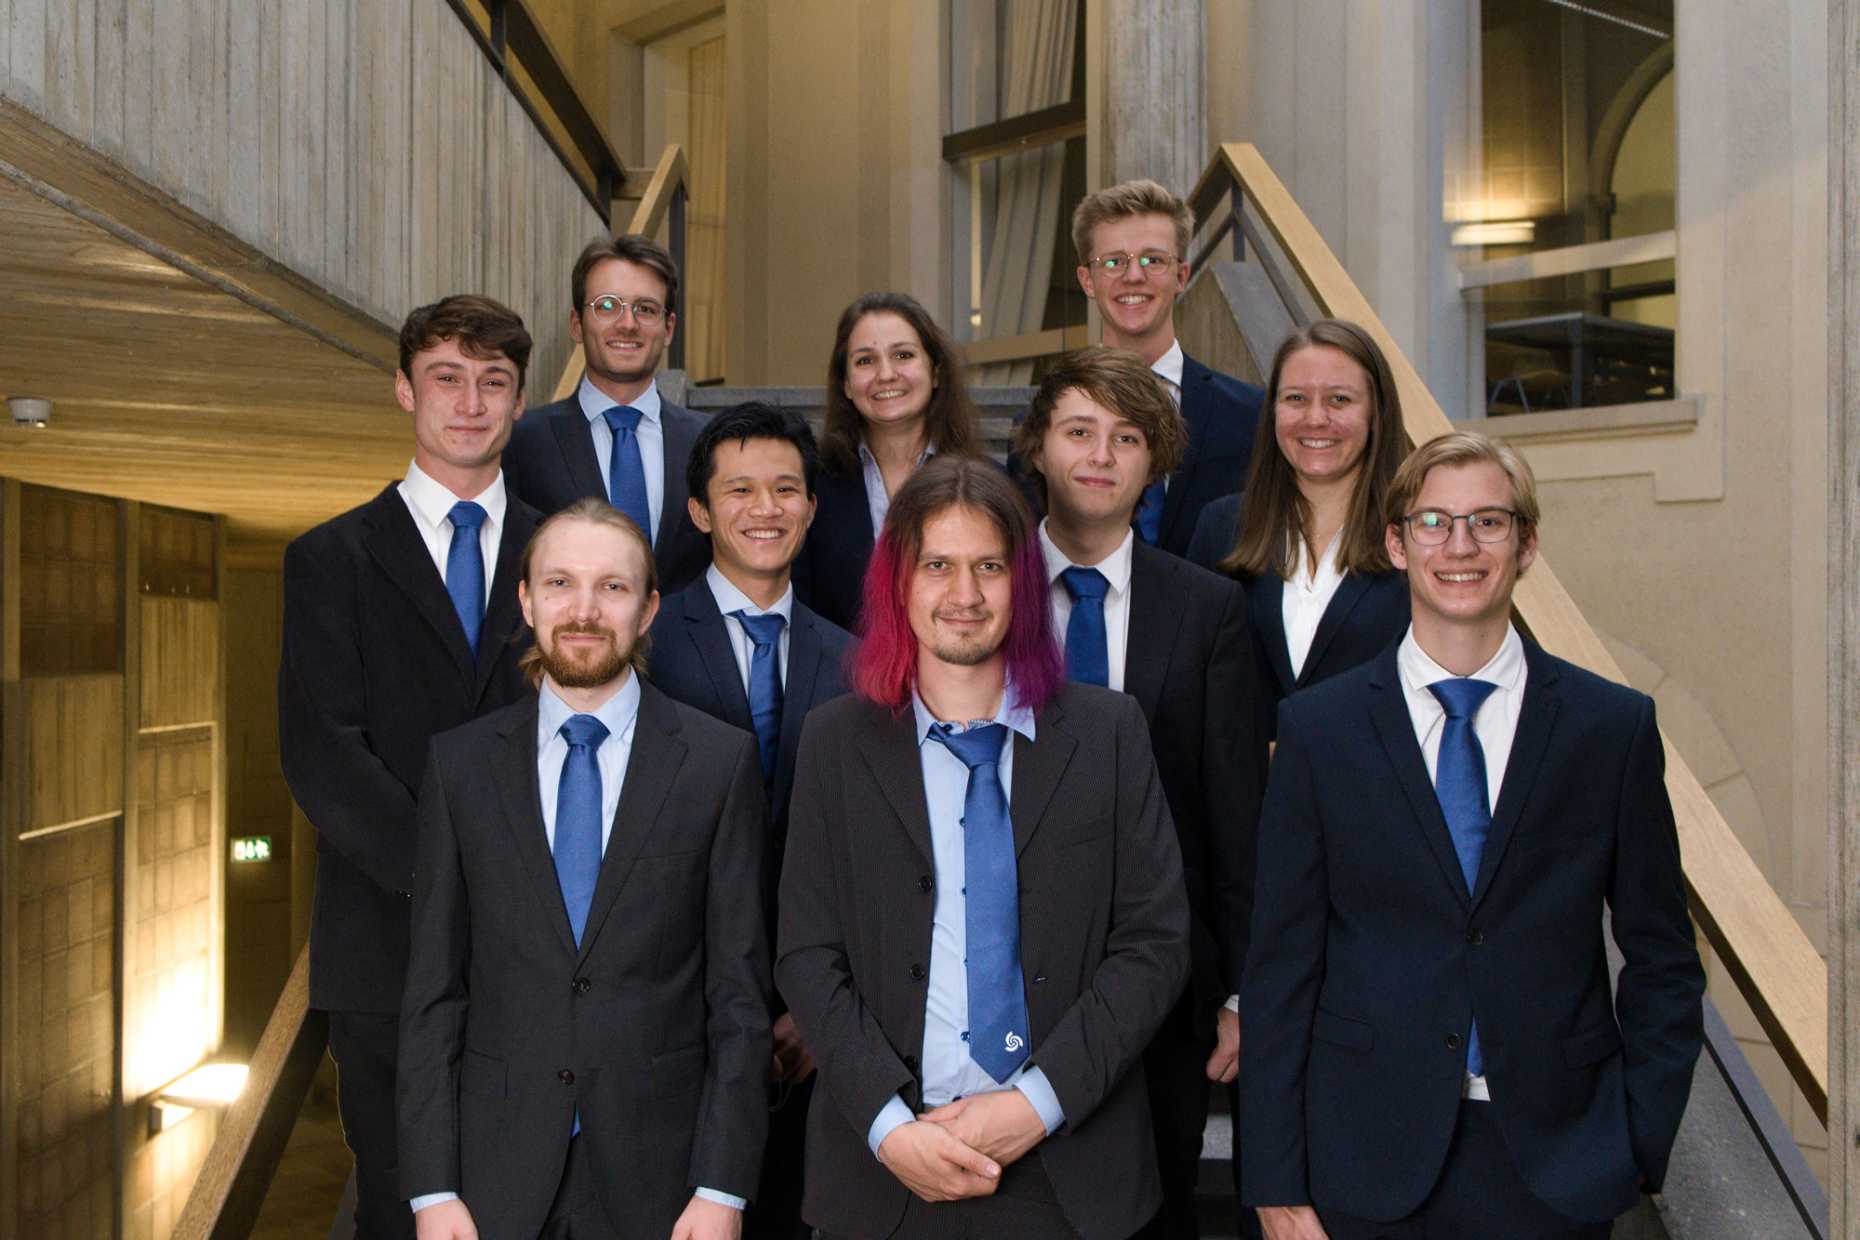 Enlarged view: Organising committee for the Kontaktparty 2022 wearing suits on the stairs in the ETH main building.